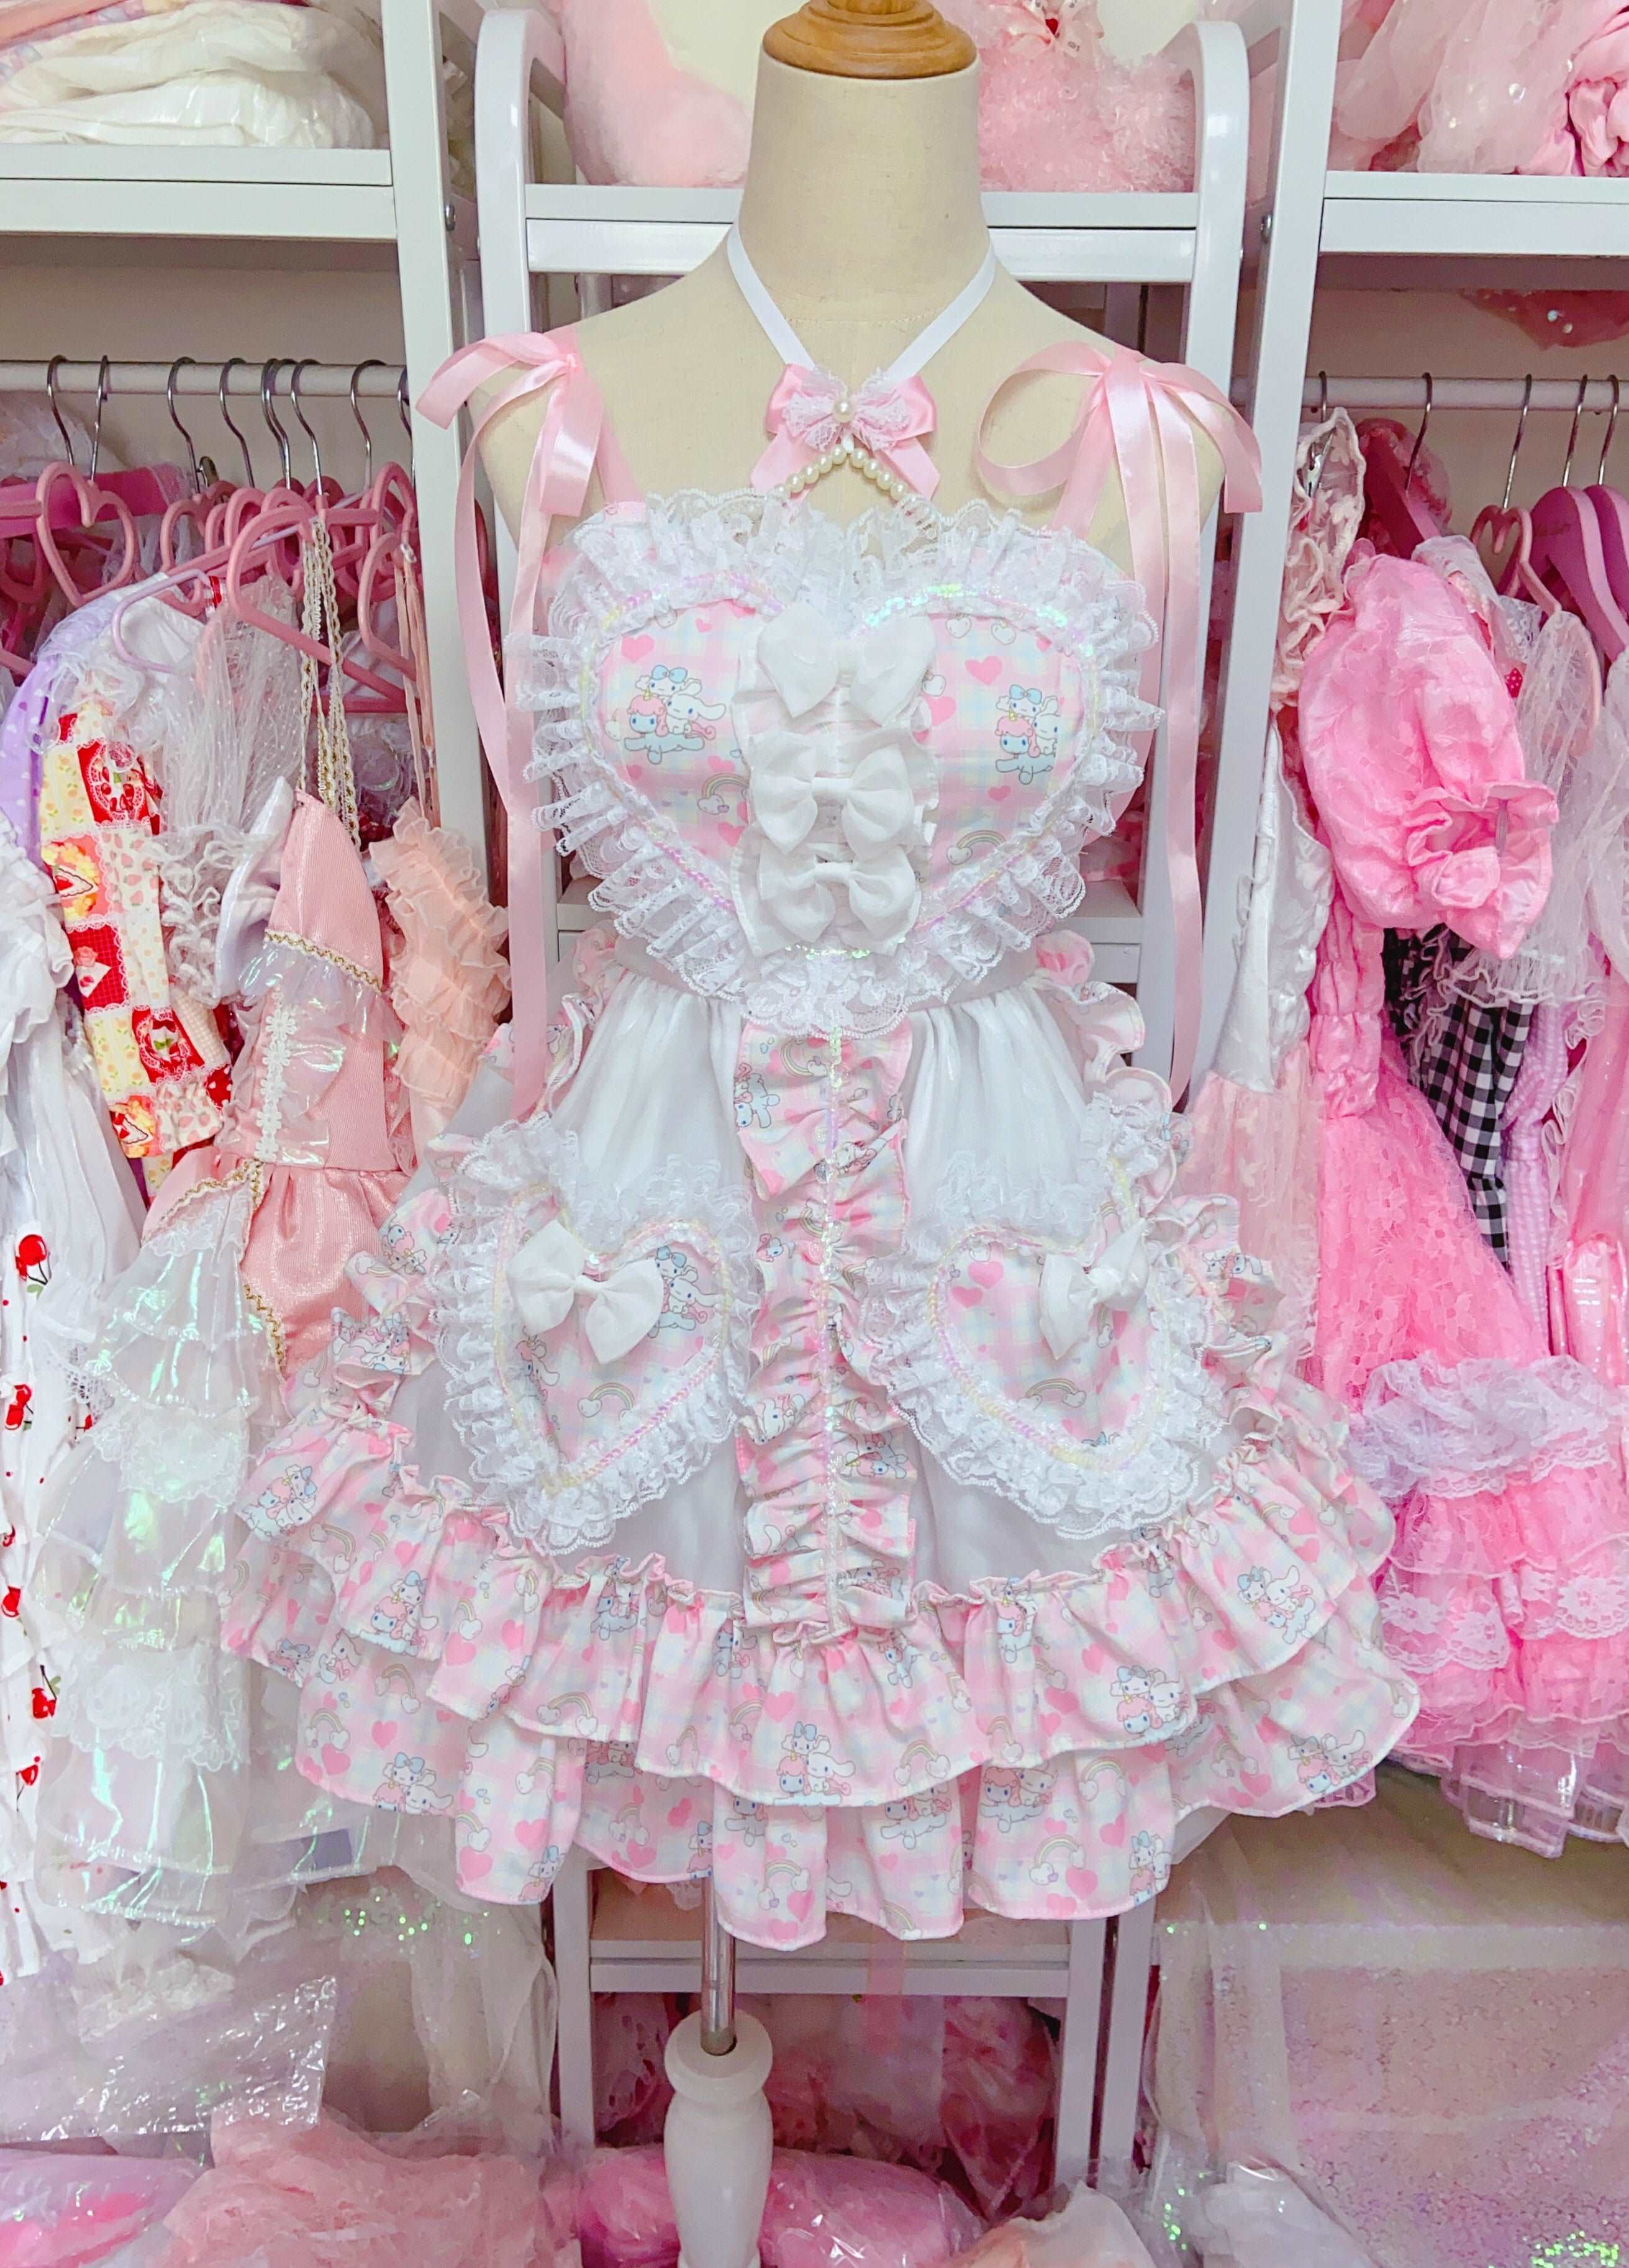 Candy Fairy Cinnamon Dog Pink White Frill Lace Maid Strap Dress